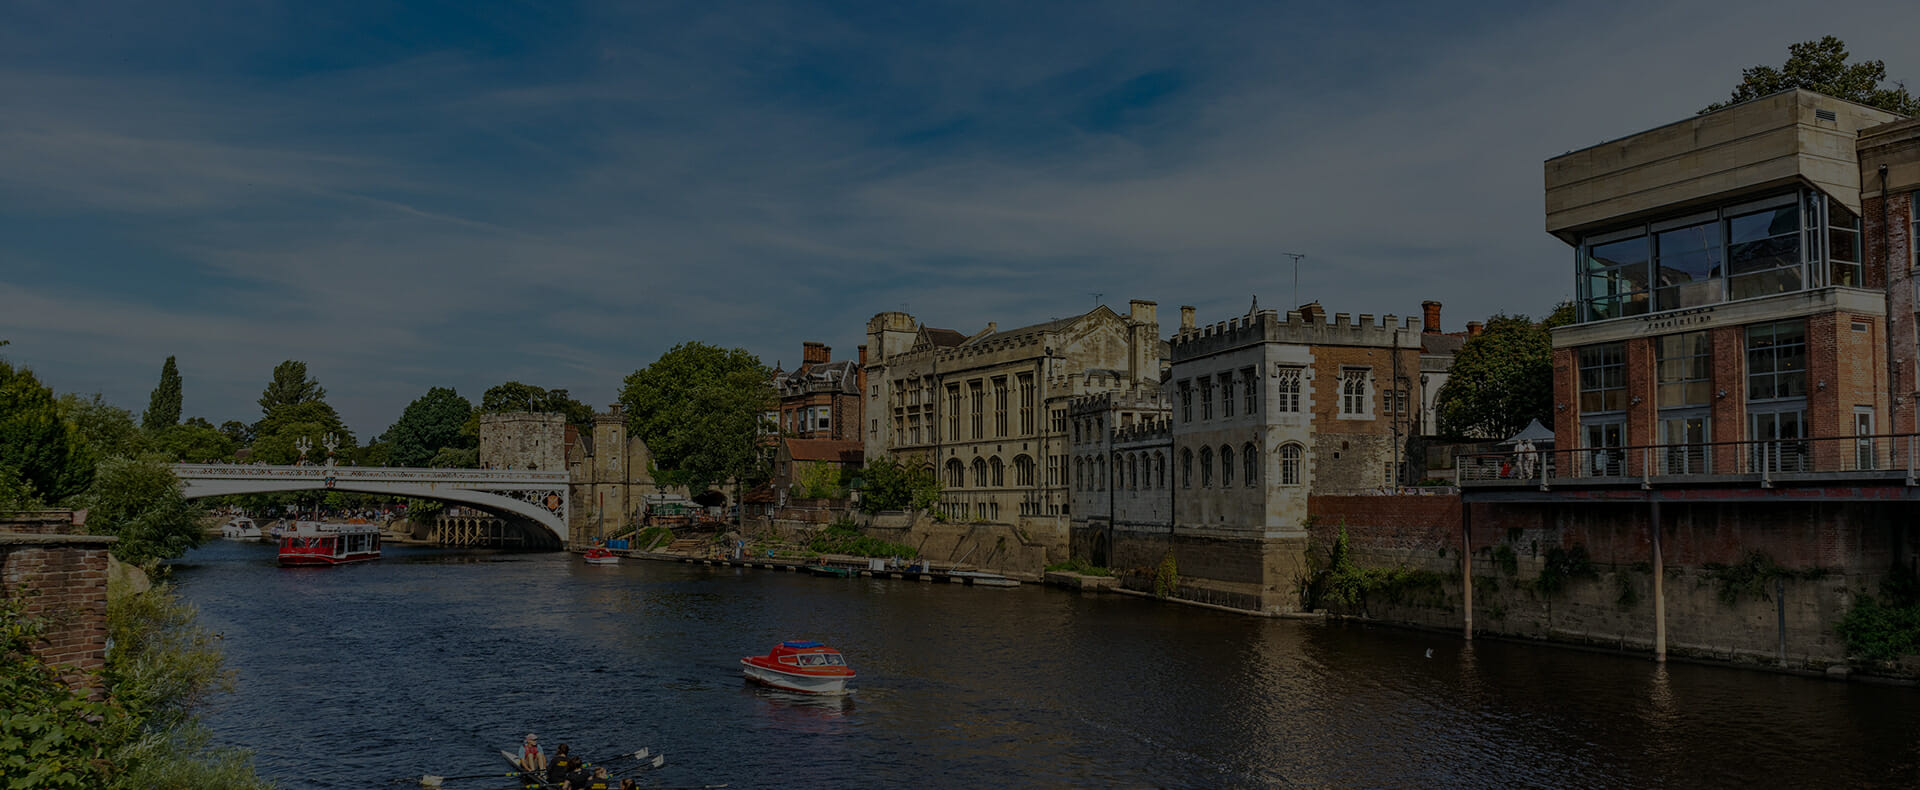 old buildings and a bridge above the river ouse in York